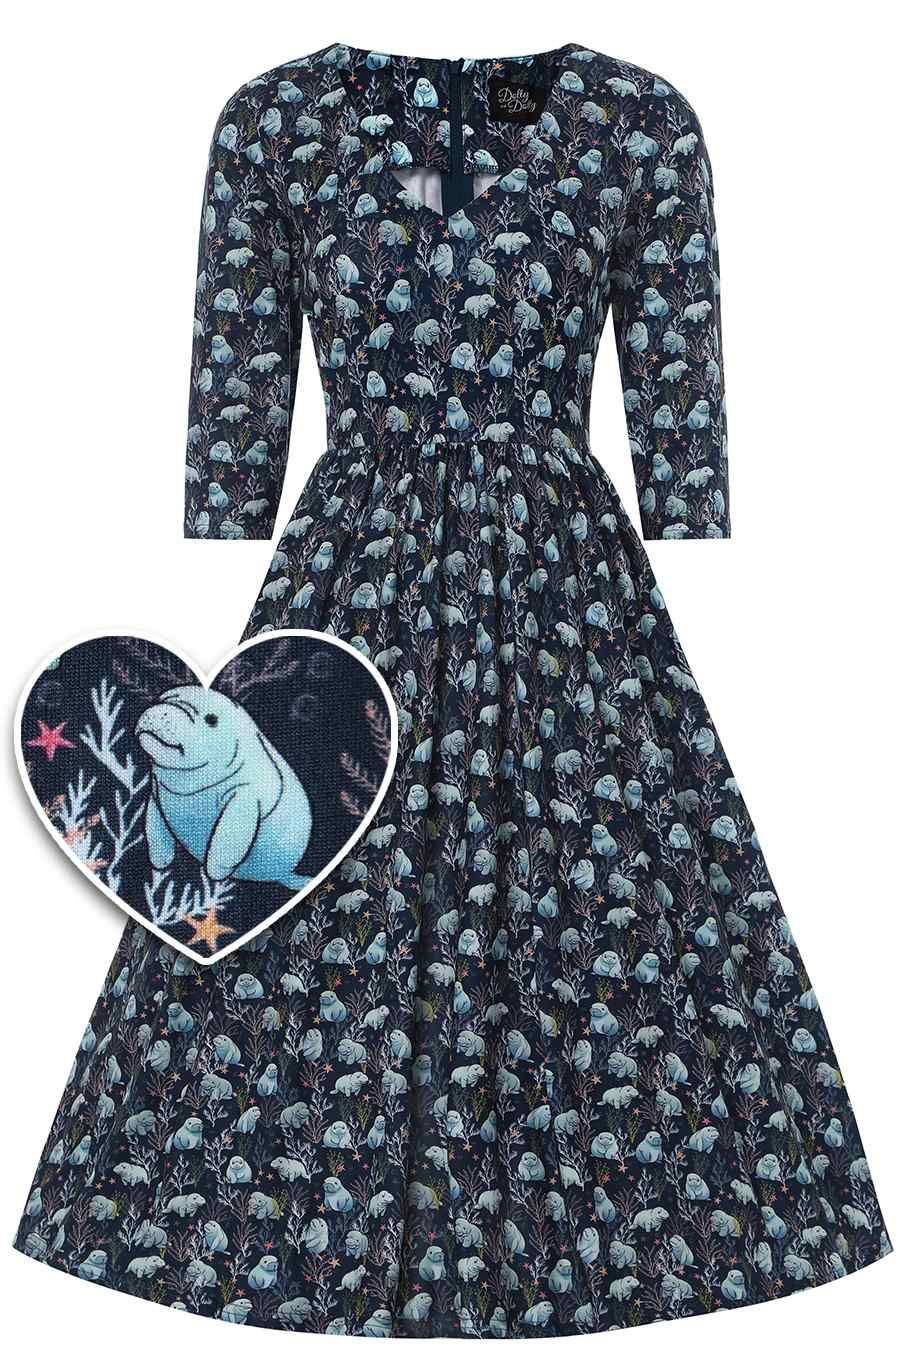 Front View of Blue Manatee Long Sleeved Swing Dress in Navy